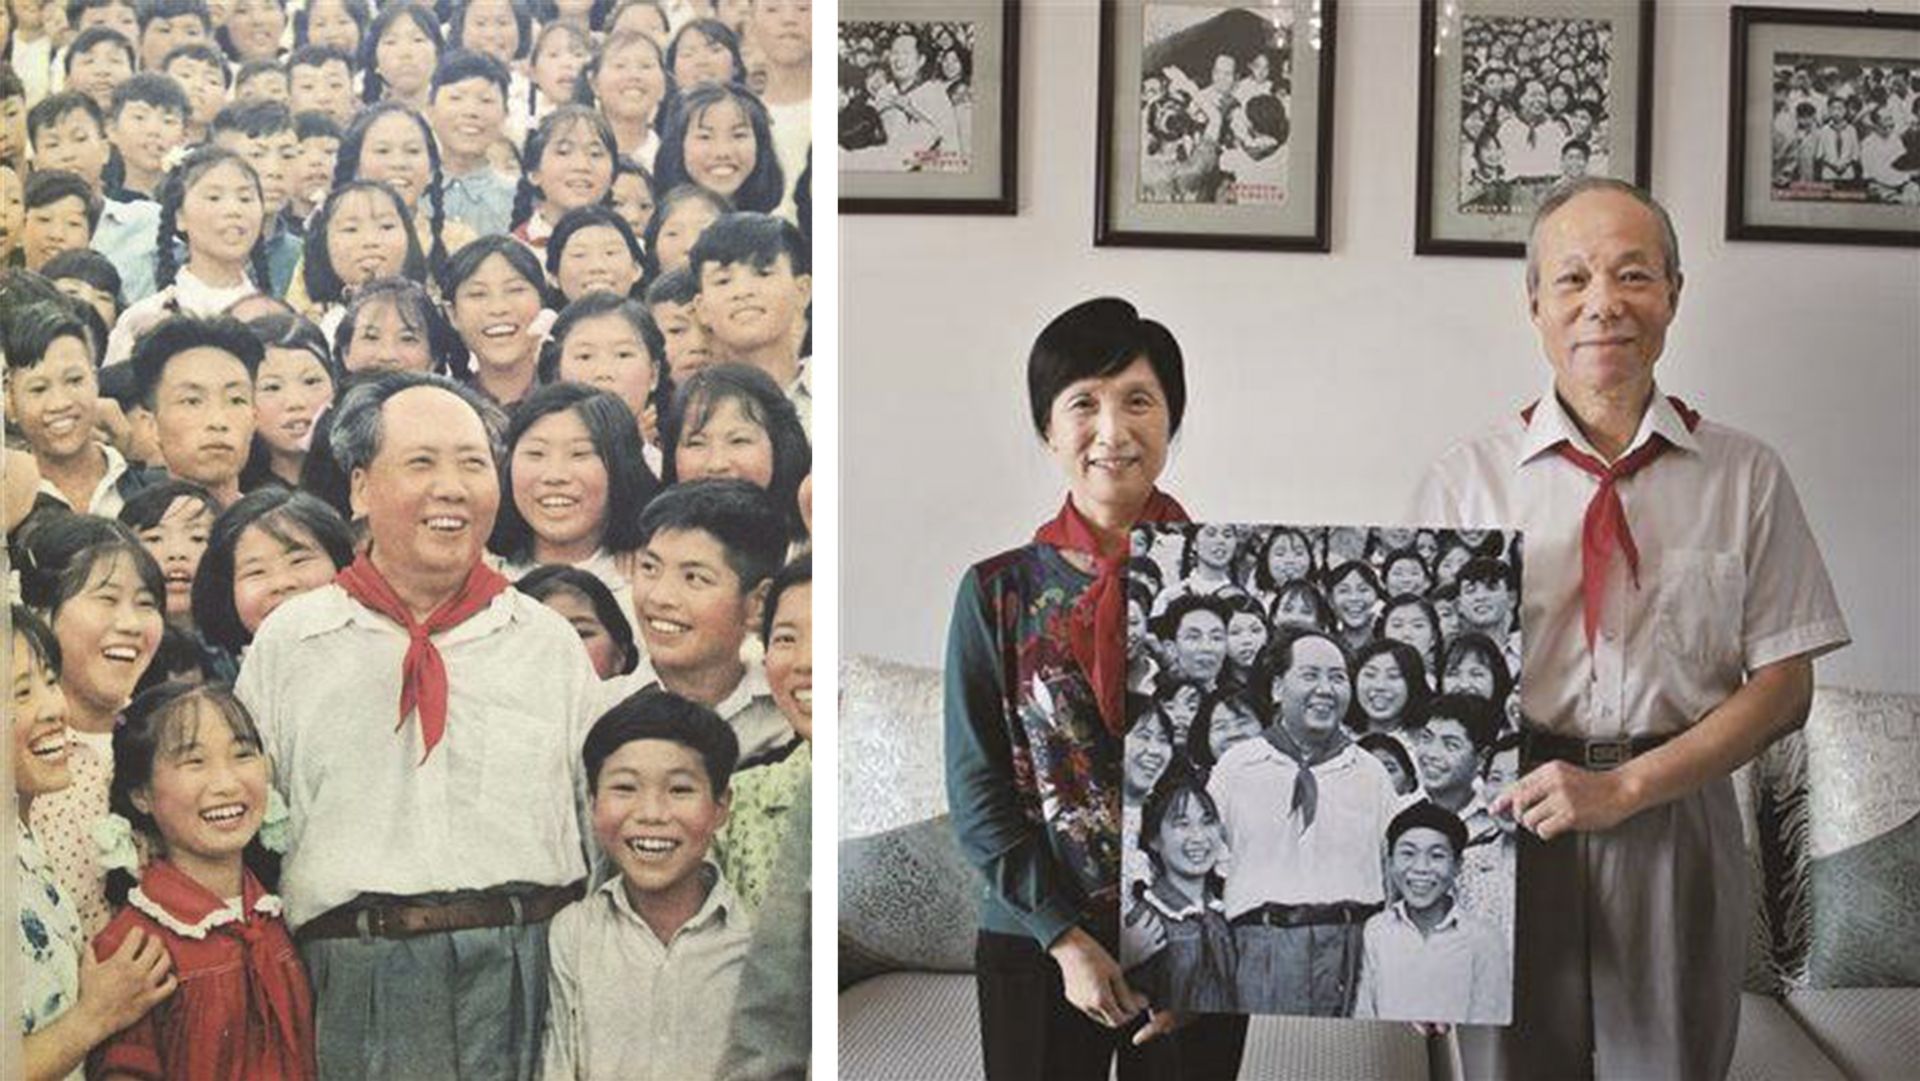  The "golden child" who stood beside Chairman Mao 65 years ago worked in Hubei